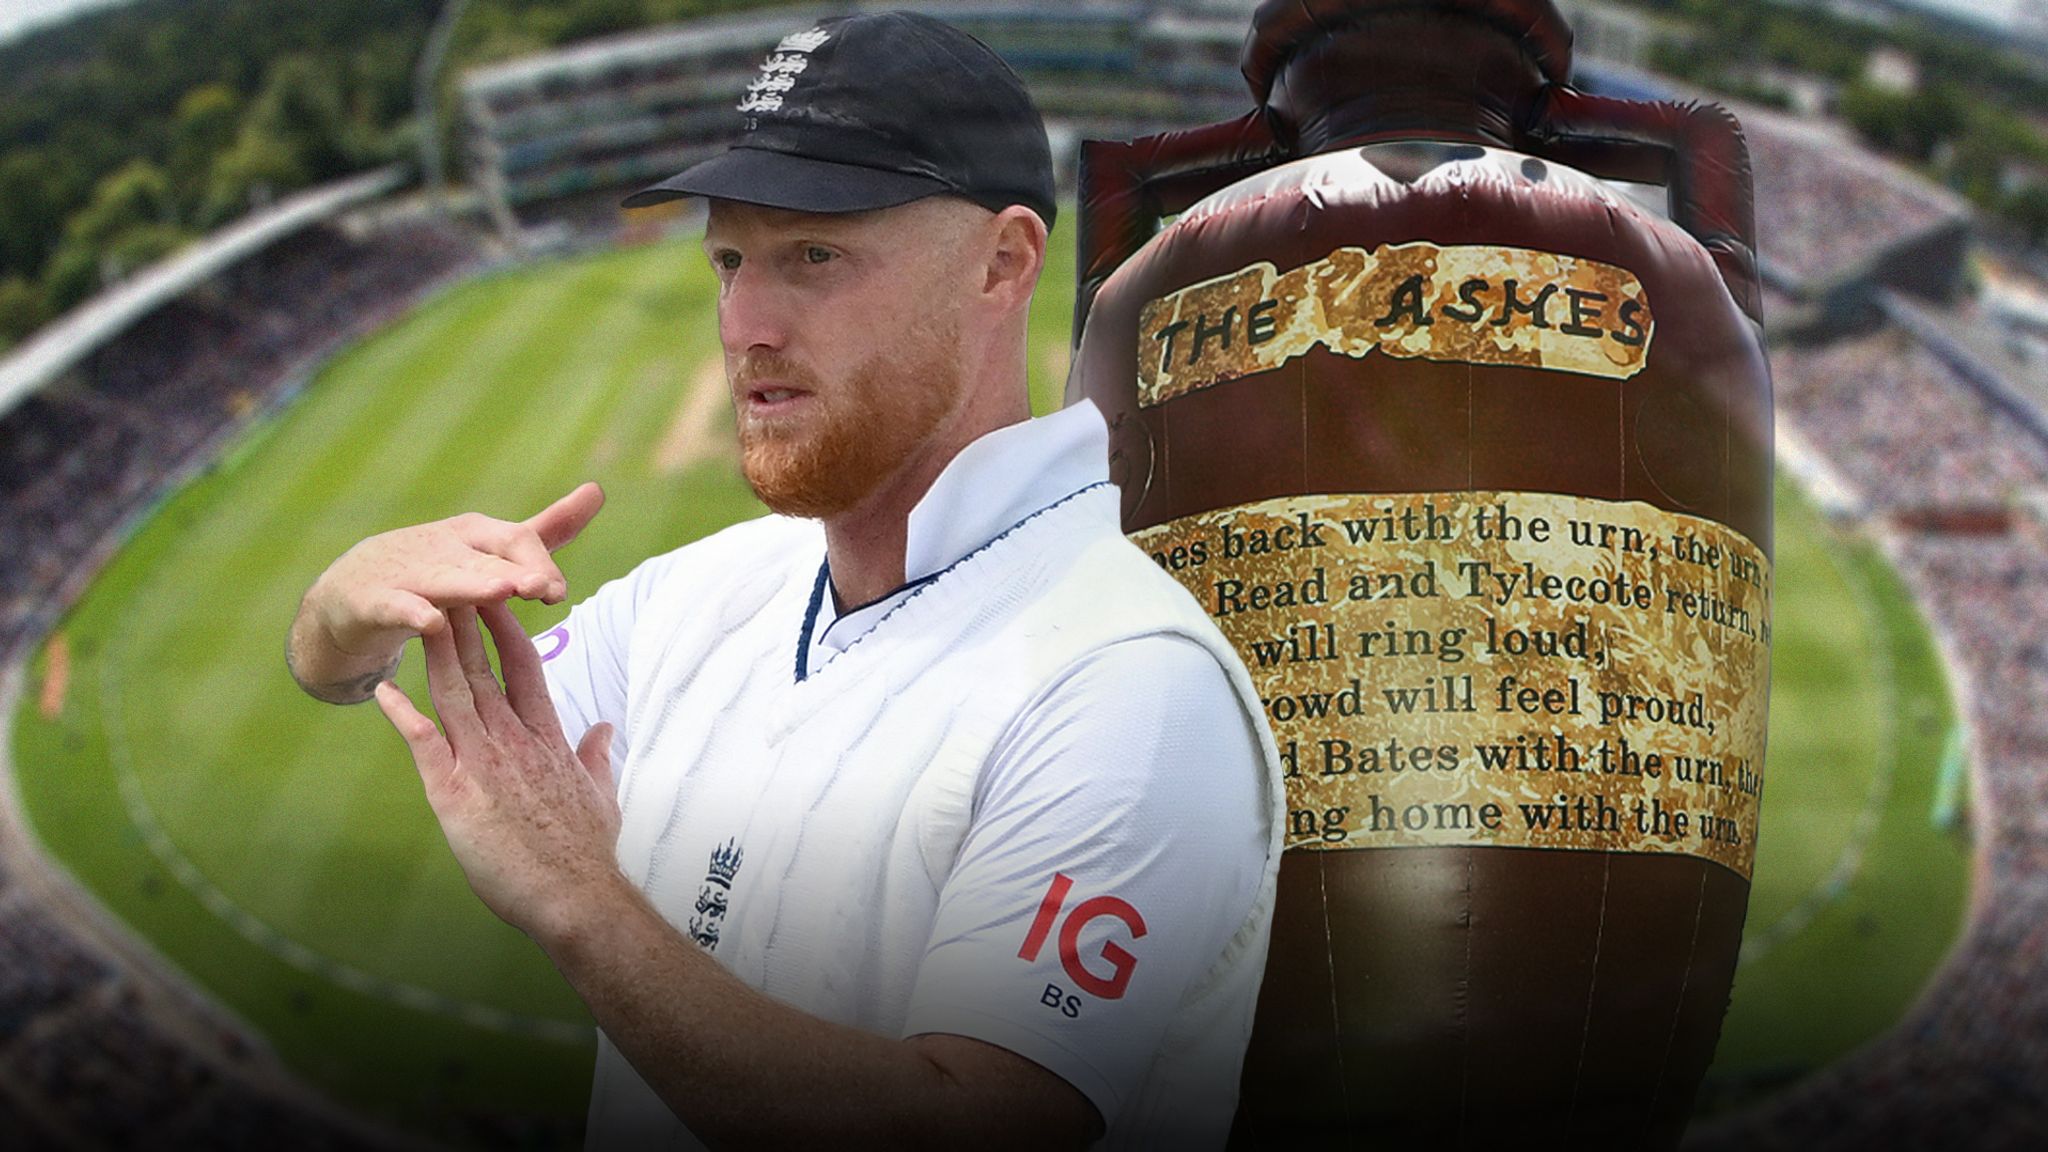 The Ashes, a beginner's guide: All you need to know about Bazball